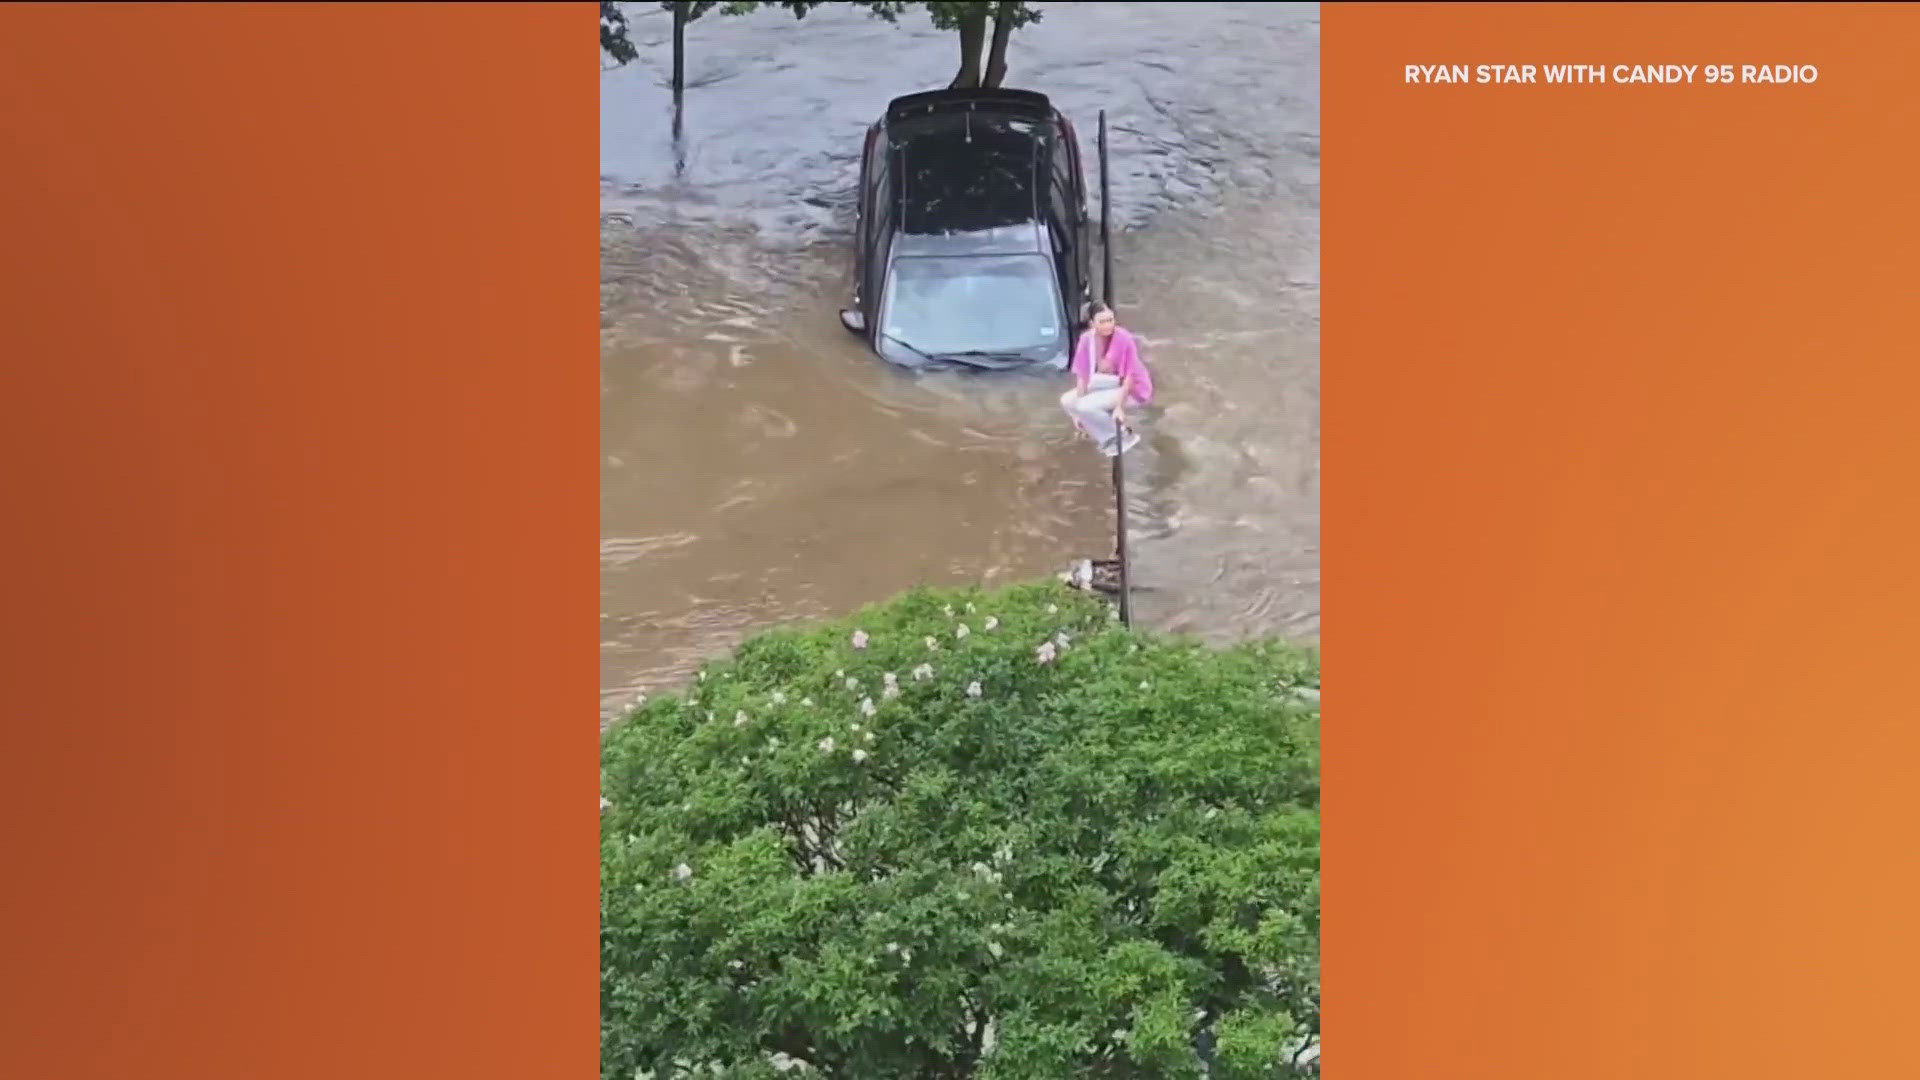 A driver was caught on video entering the parking lot after parts of Houston area were placed under a mandatory evacuation order Thursday.